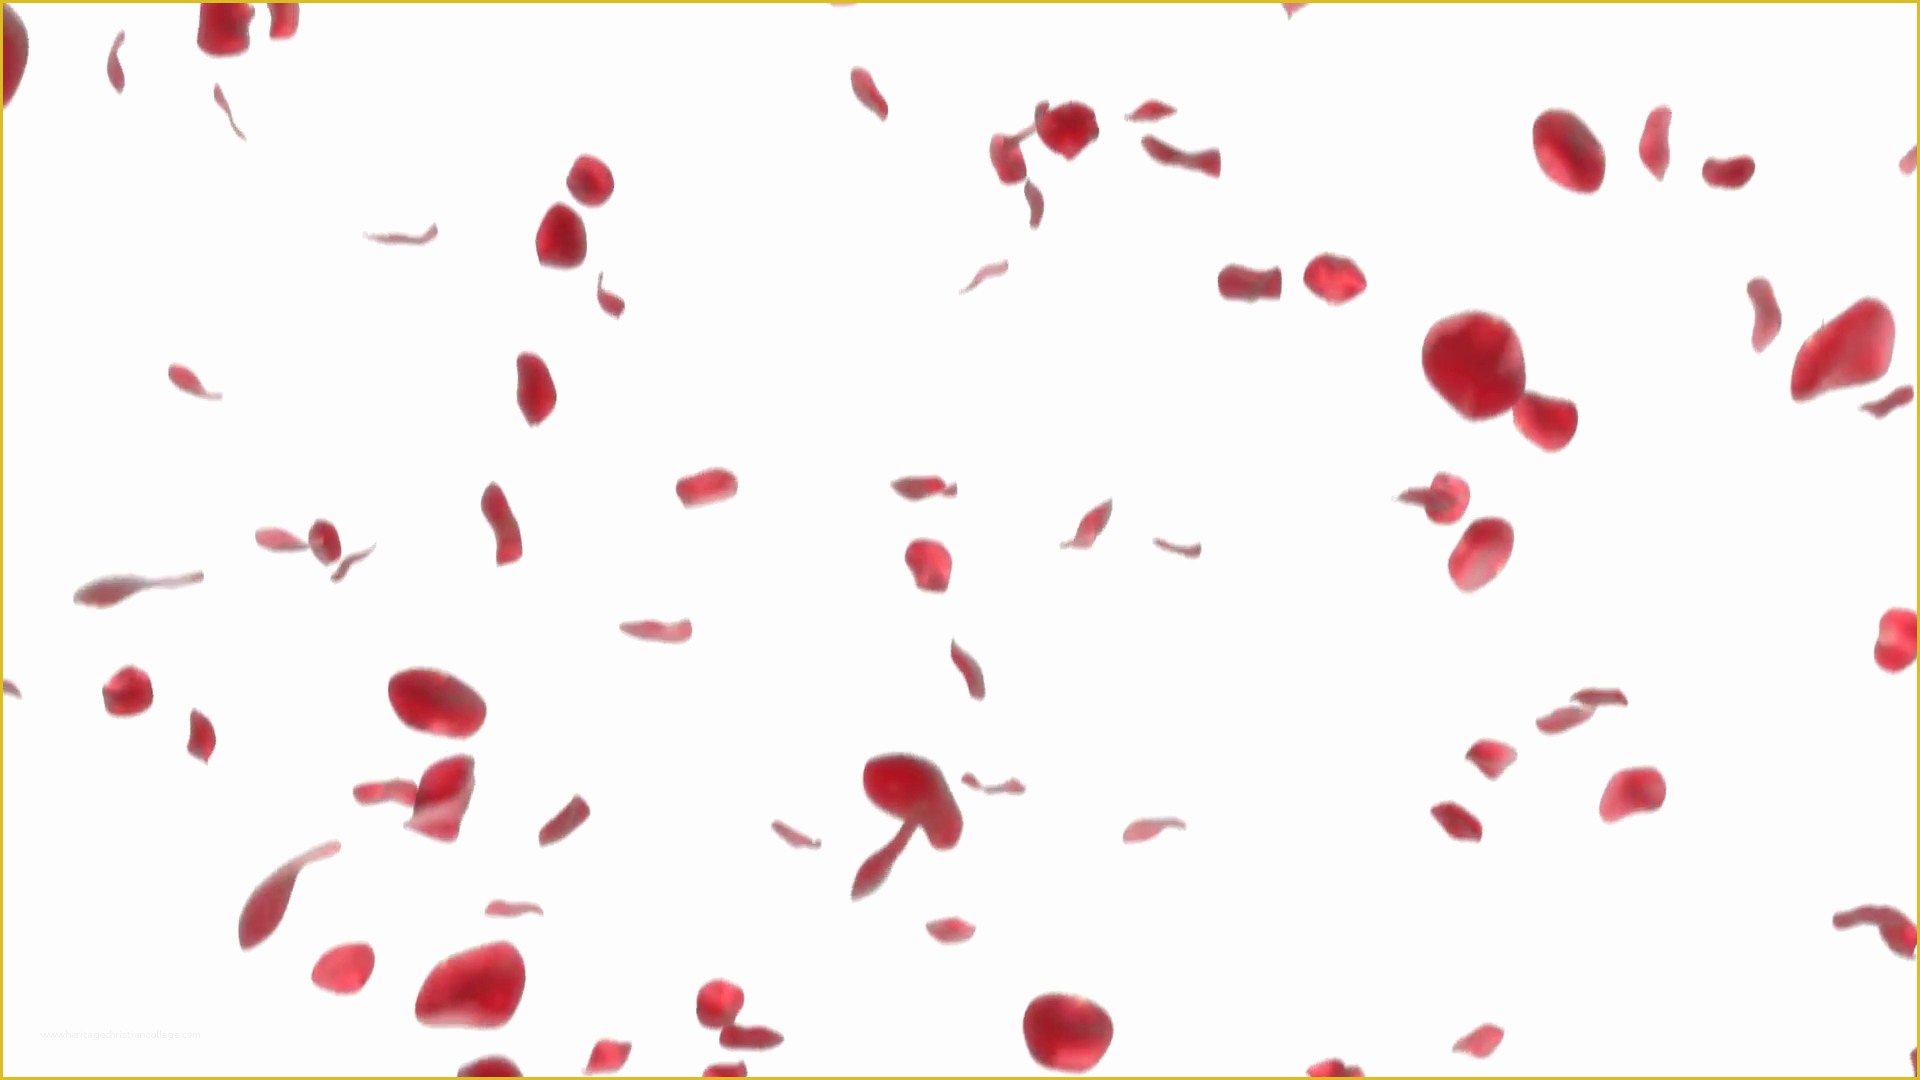 Falling Flower Petals after Effects Template Free Of Falling Rose Petals Looped 3d Animation Motion